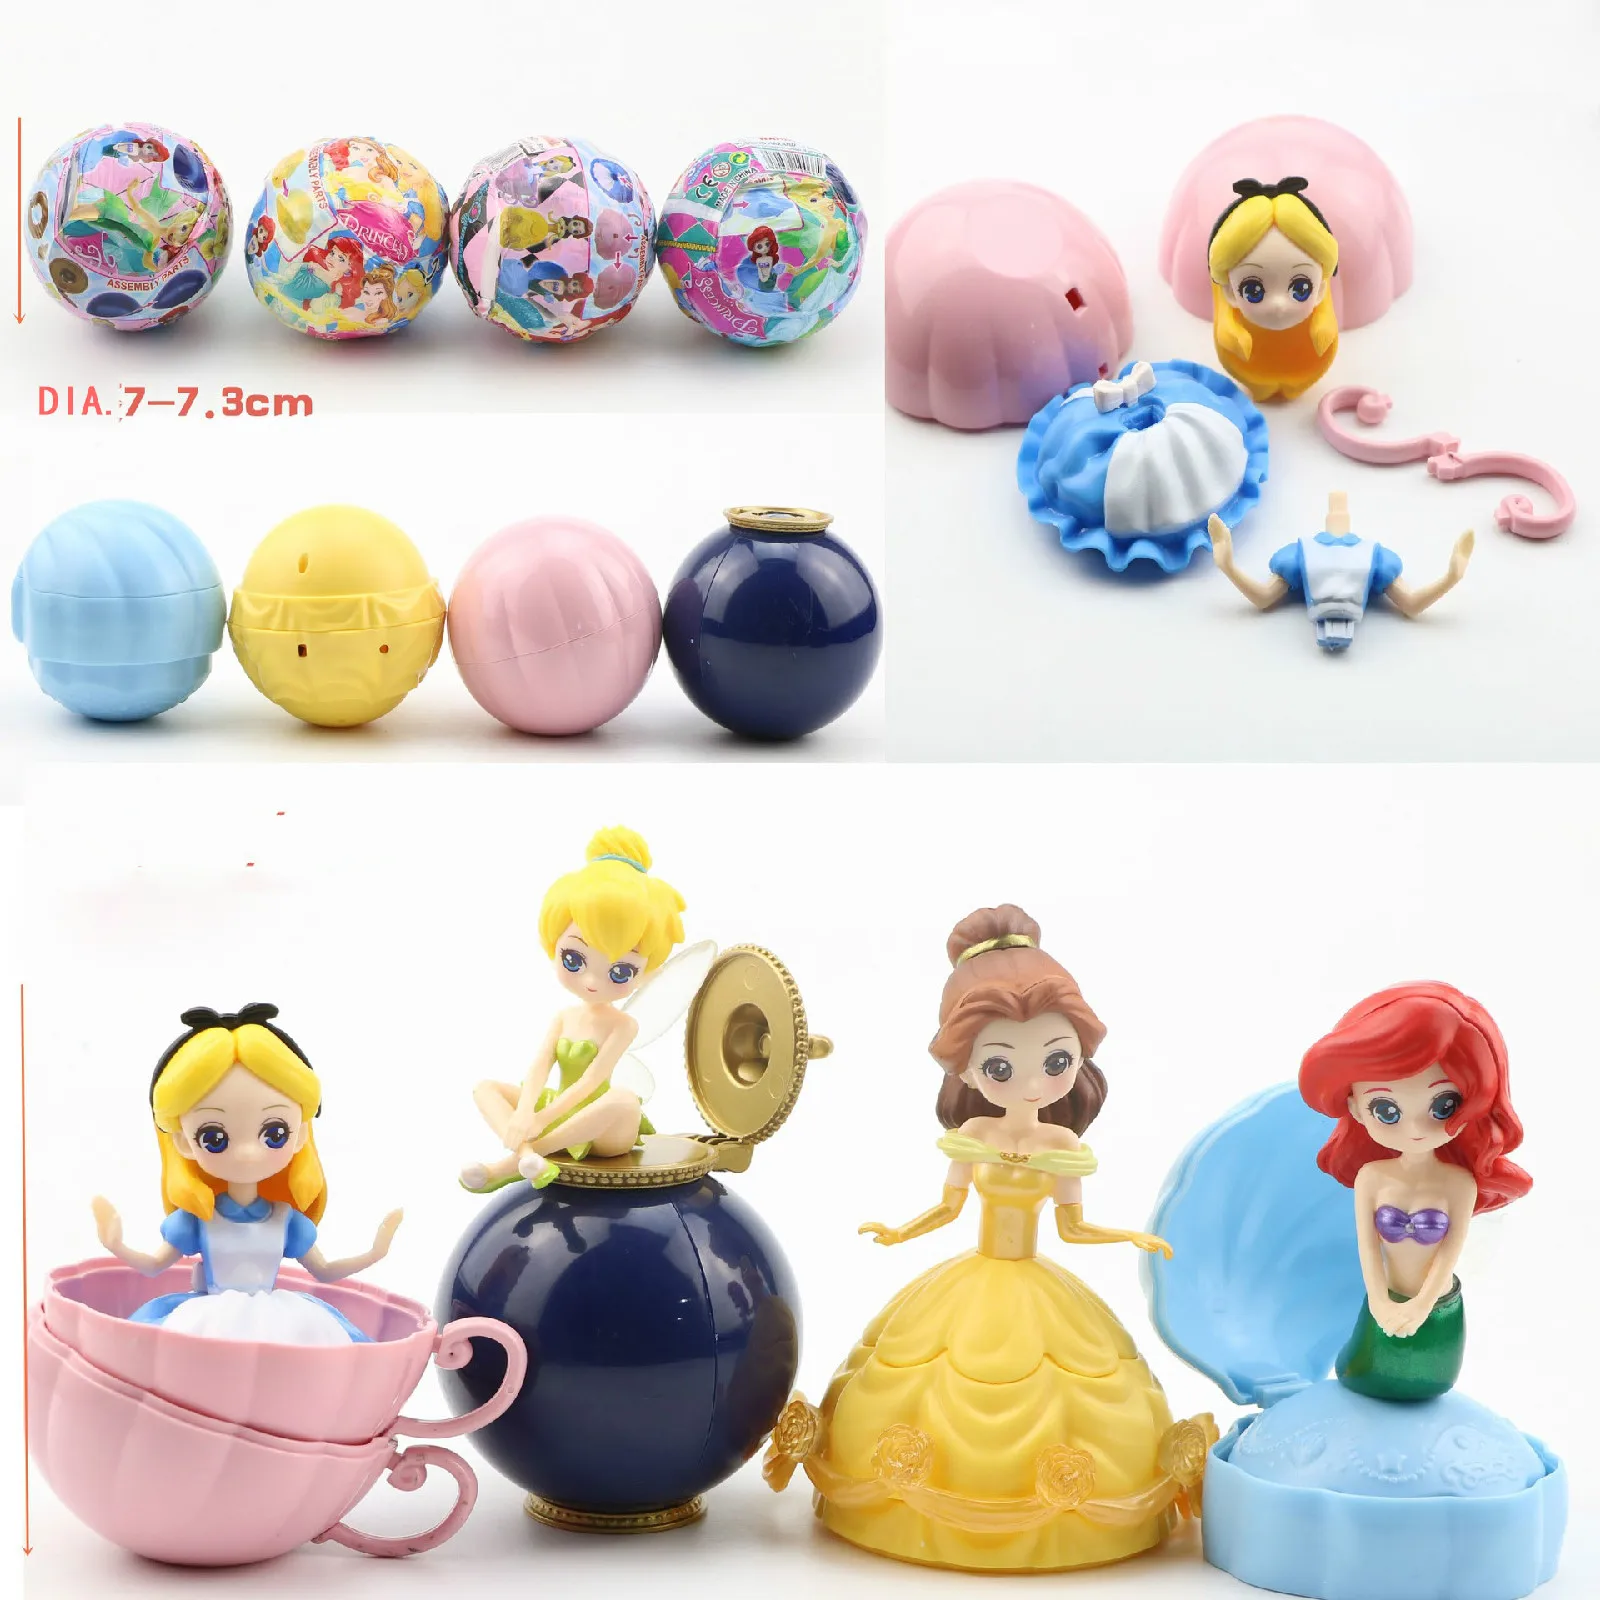 Action Princess Figure Toys Mysterious Gashapon Princess Alice ARIEL DAZZLES BELLE Twisted Egg Toys Girls Gifts